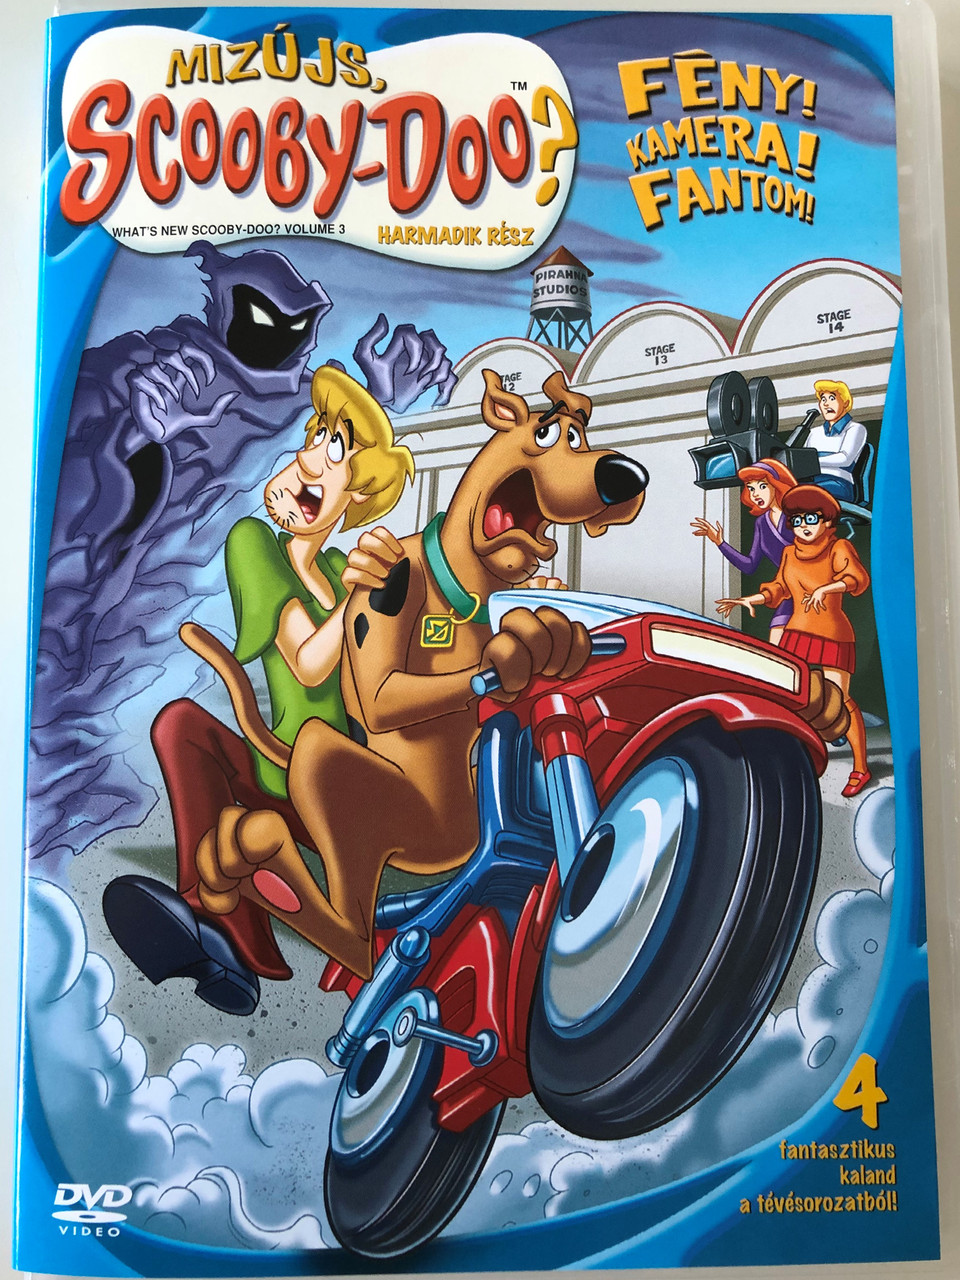 What's new Scooby-Doo? Volume 3 DVD 2003 Mizújs, Scooby-Doo? Fény, kamera,  fantom / 4 episodes: She Sees Sea Monsters by the Seashore, Toy Scary Boo,  Lights! Camera! Mayhem!, Pompeii and Circumstance - bibleinmylanguage